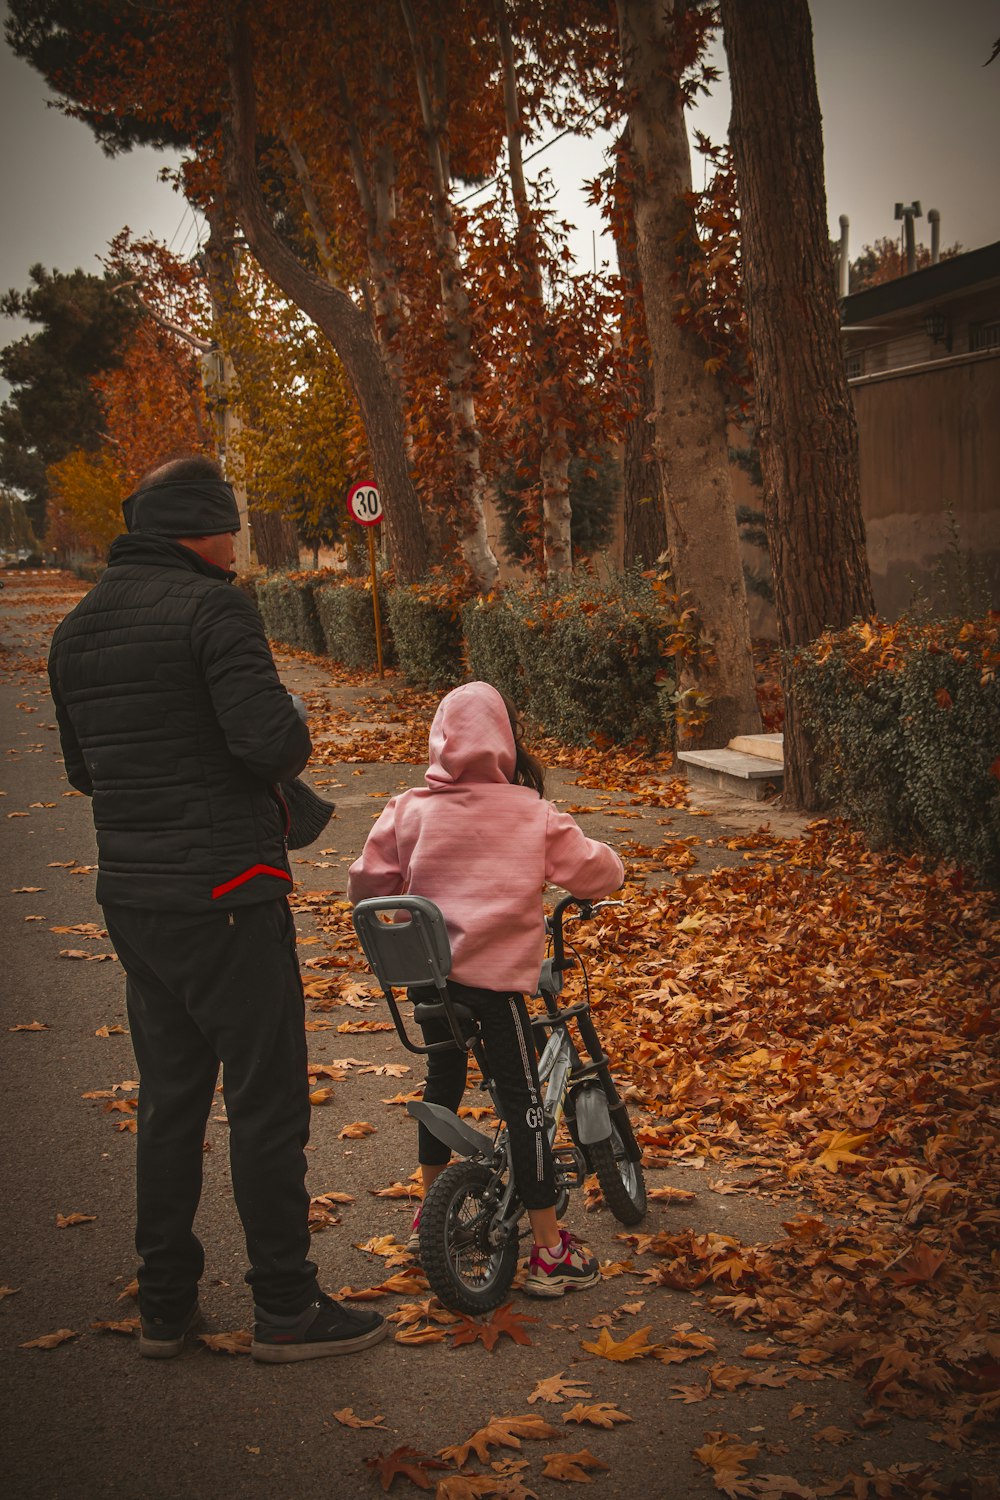 a man standing next to a child on a bike